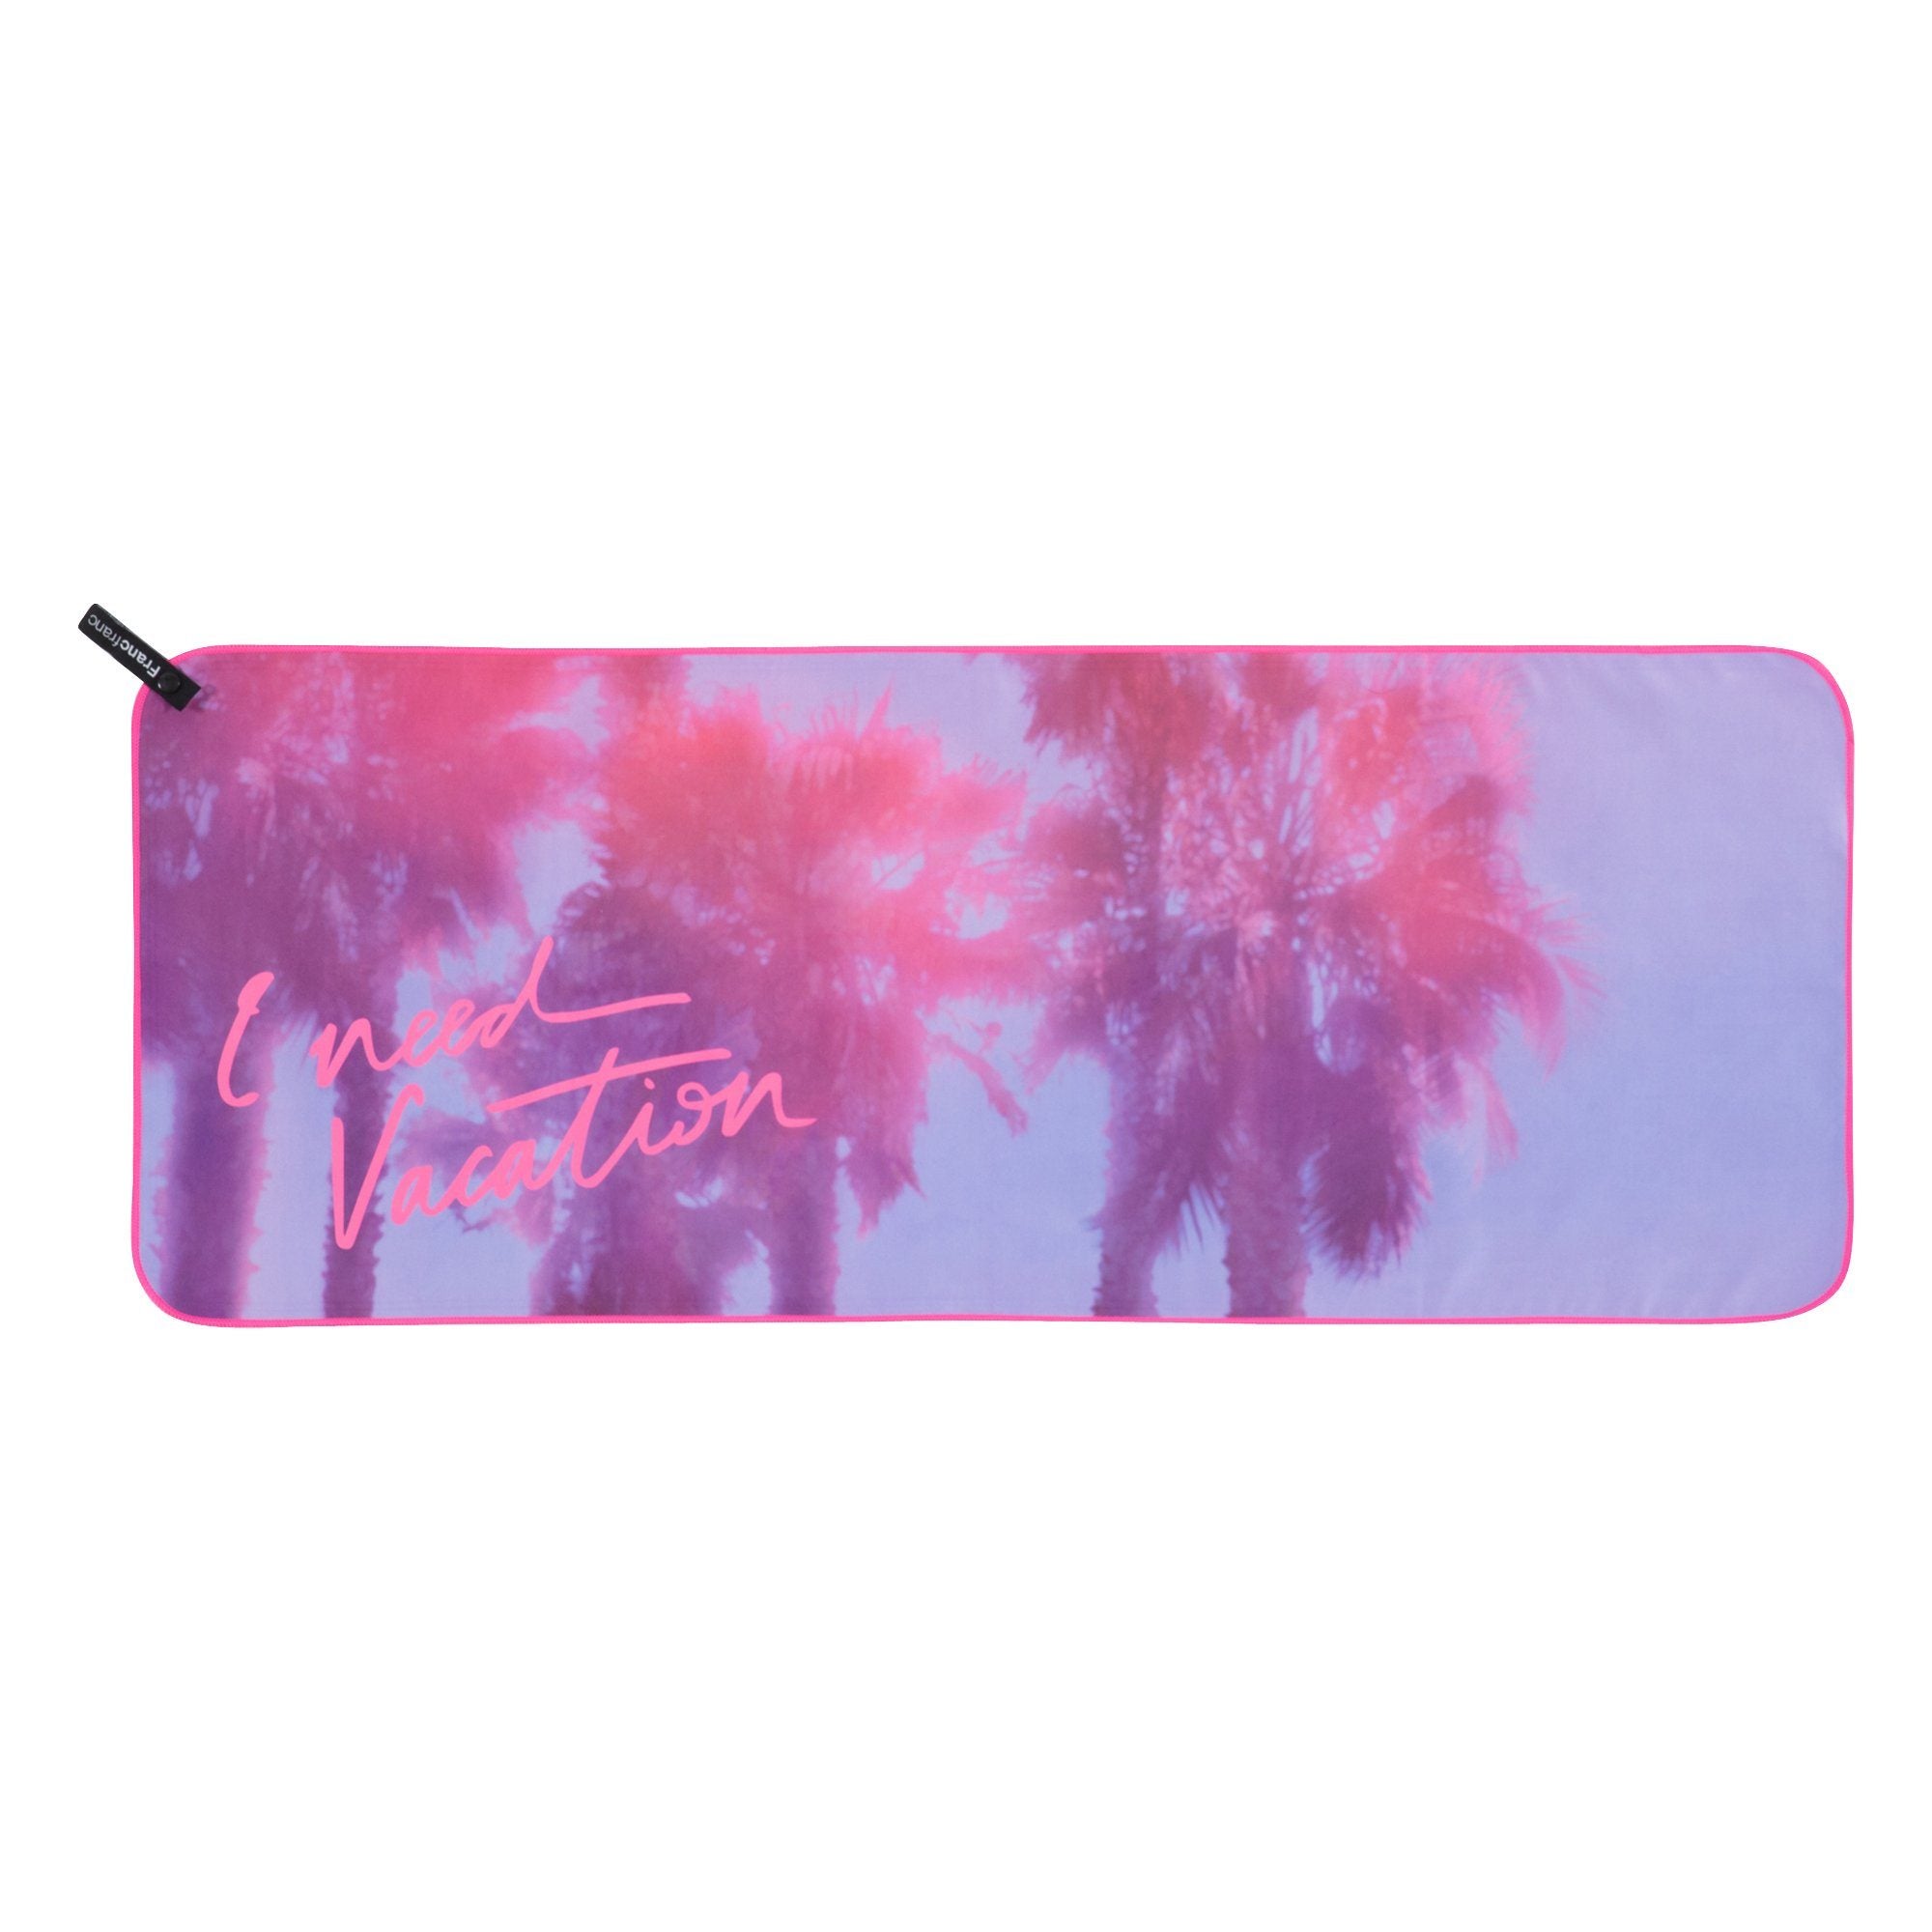 COMPACT ACTIVE TOWEL Neon Small